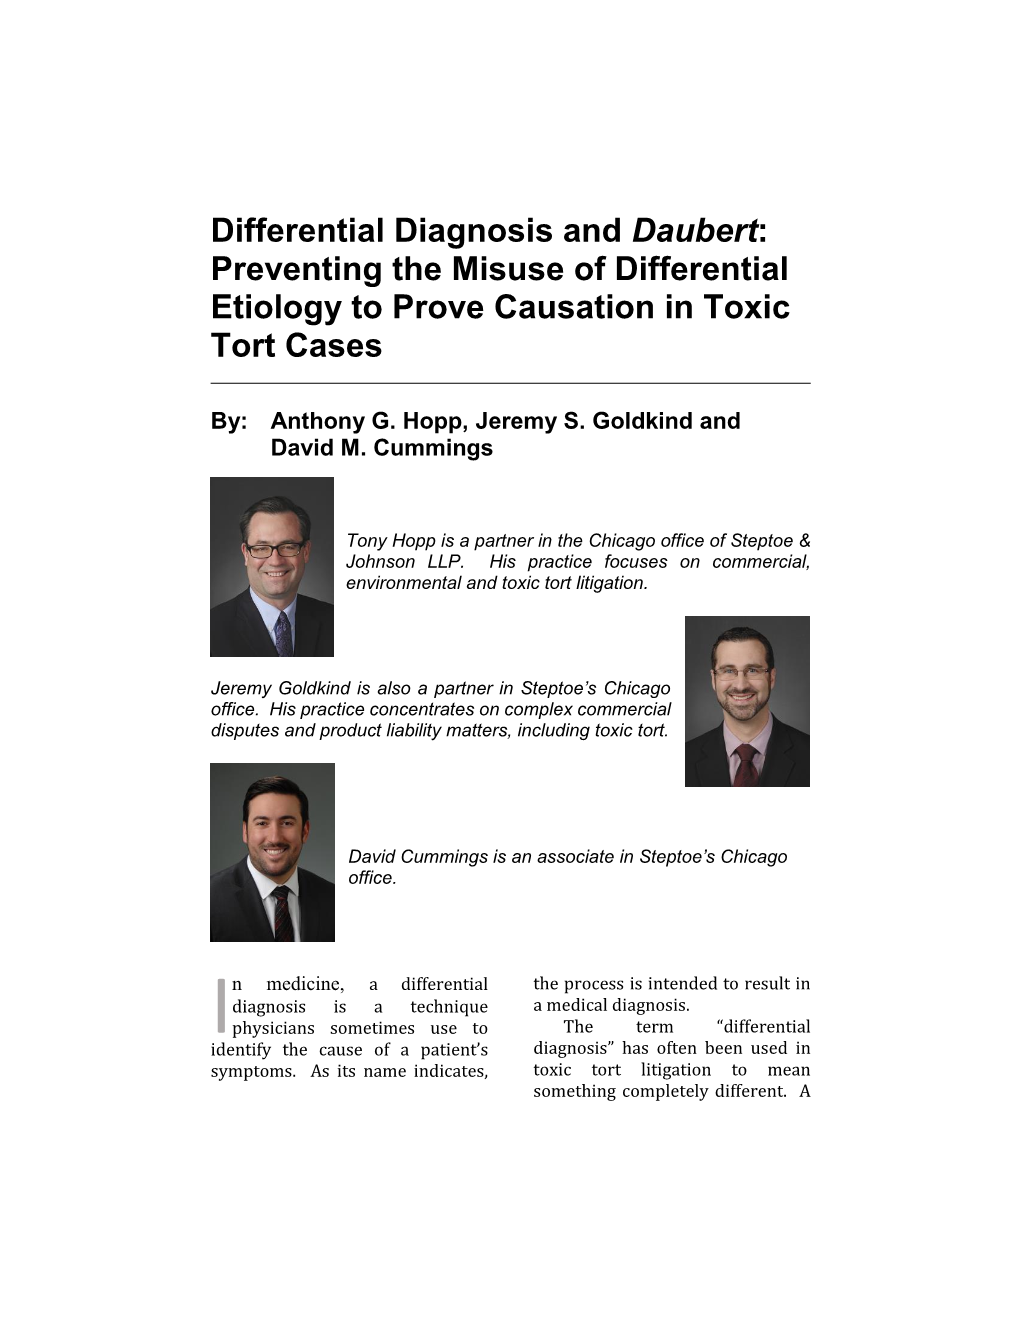 Differential Diagnosis and Daubert: Preventing the Misuse of Differential Etiology to Prove Causation in Toxic Tort Cases